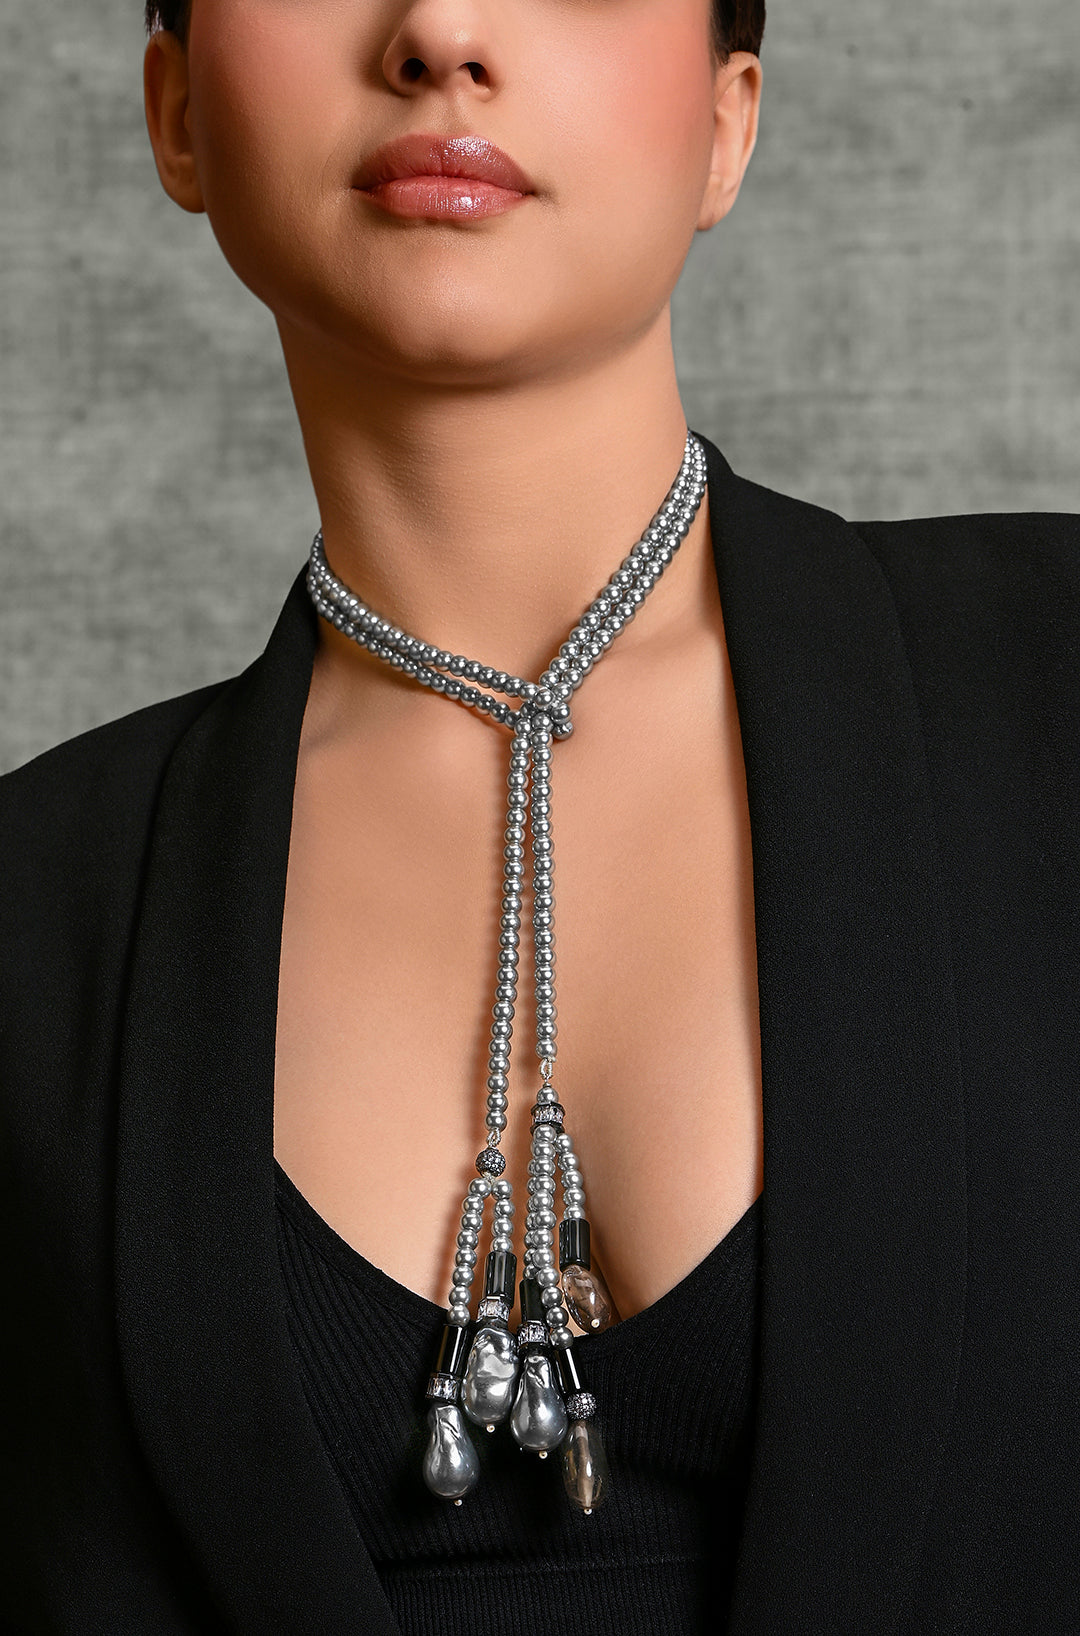 Beauteous Beaded Scarf Necklace In Grey